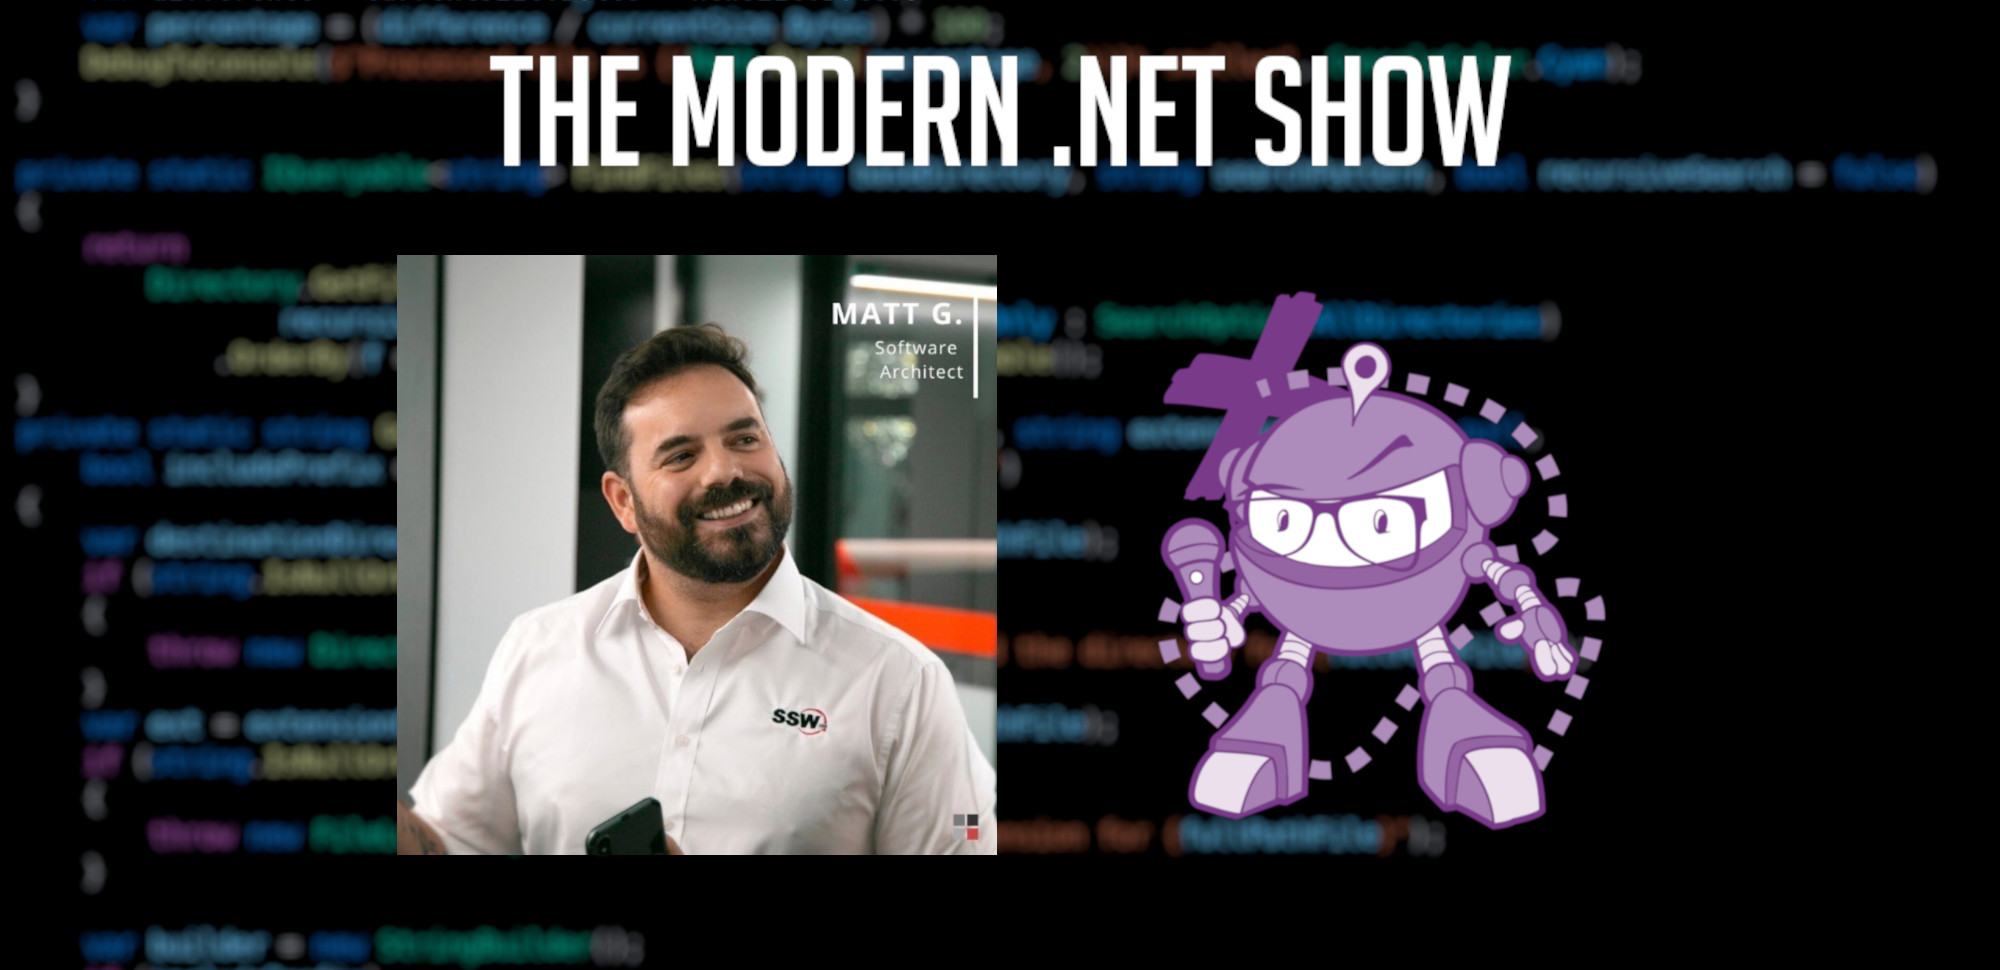 A blurry image of source code, too blurry to read, take the place of the background. Layered over that are the headshot of Matt Goldman and a purple robot holding a microphone; these are on either side of the centre of the image. Above both is the heading 'THE MODERN .NET SHOW' in bold, white text.